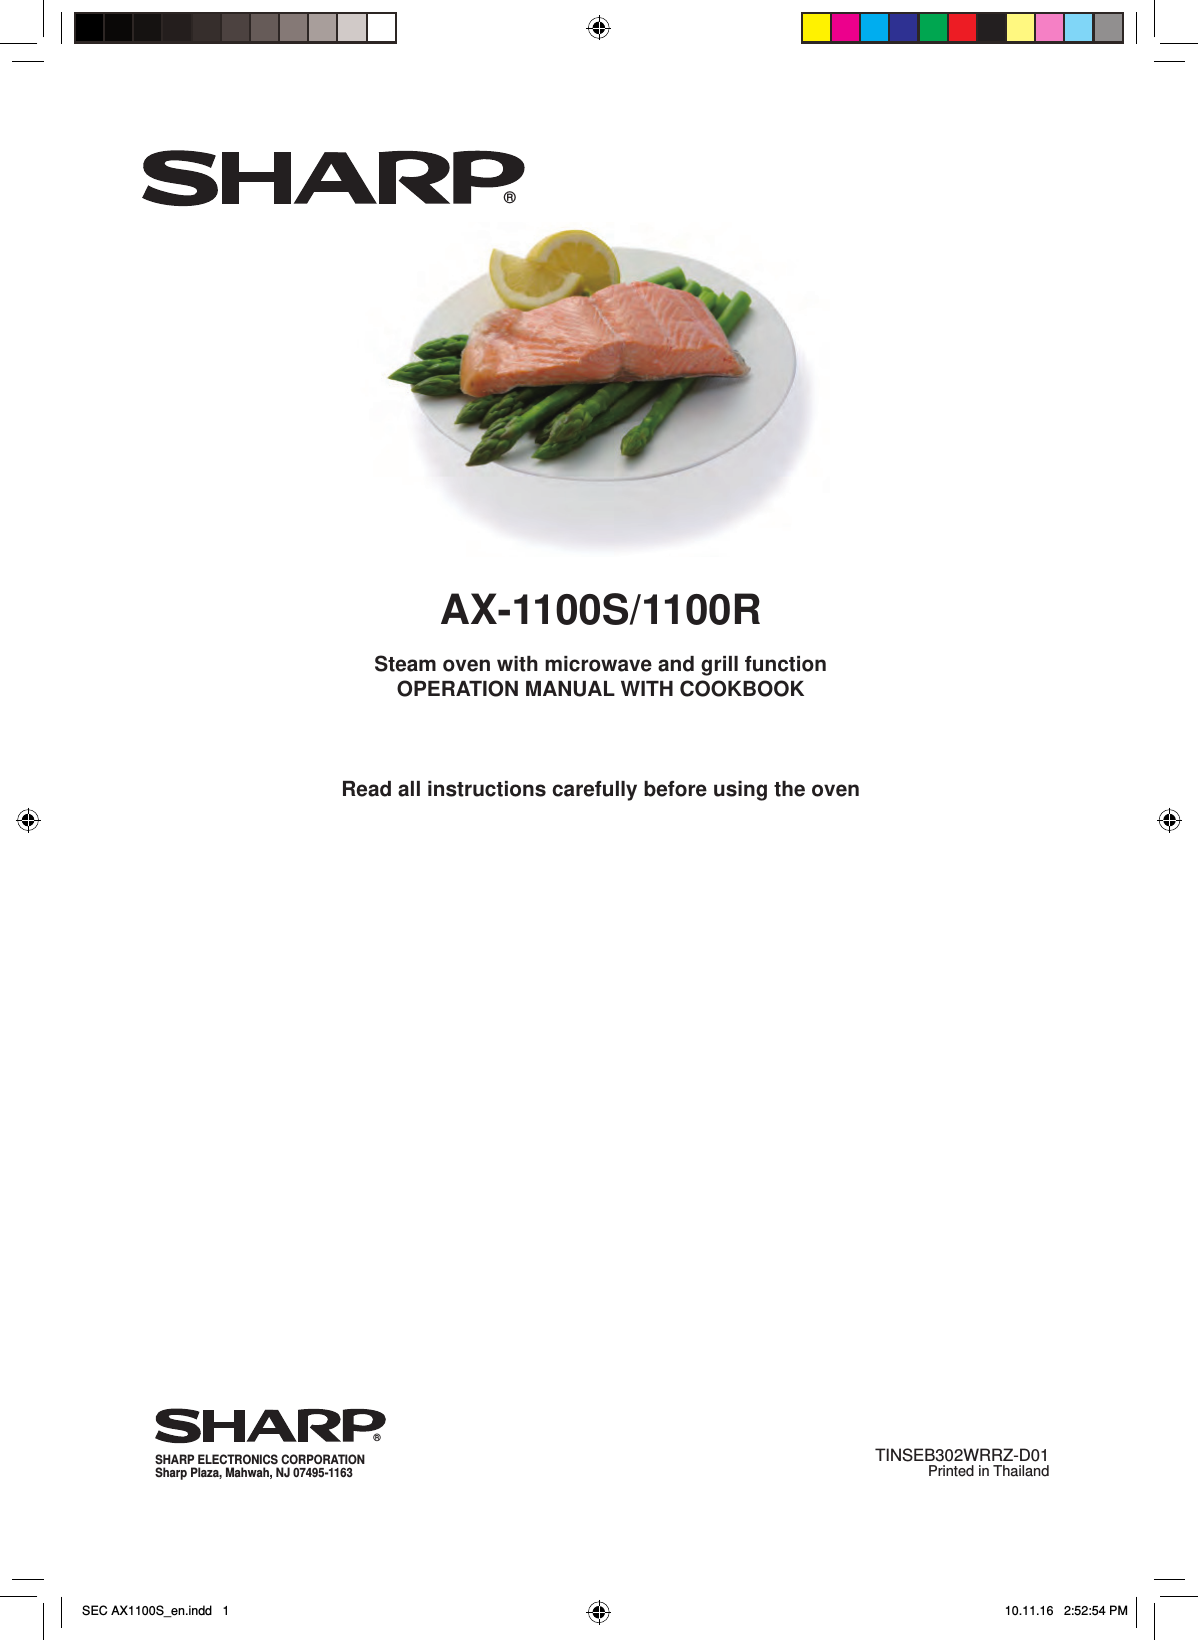 Steam oven with microwave and grill functionOPERATION MANUAL WITH COOKBOOKRead all instructions carefully before using the oven AX-1100S/1100R®SHARP ELECTRONICS CORPORATIONSharp Plaza, Mahwah, NJ 07495-1163TINSEB302WRRZ-D01    Printed in Thailand®SEC AX1100S_en.indd   1SEC AX1100S_en.indd   1 10.11.16   2:52:54 PM10.11.16   2:52:54 PM